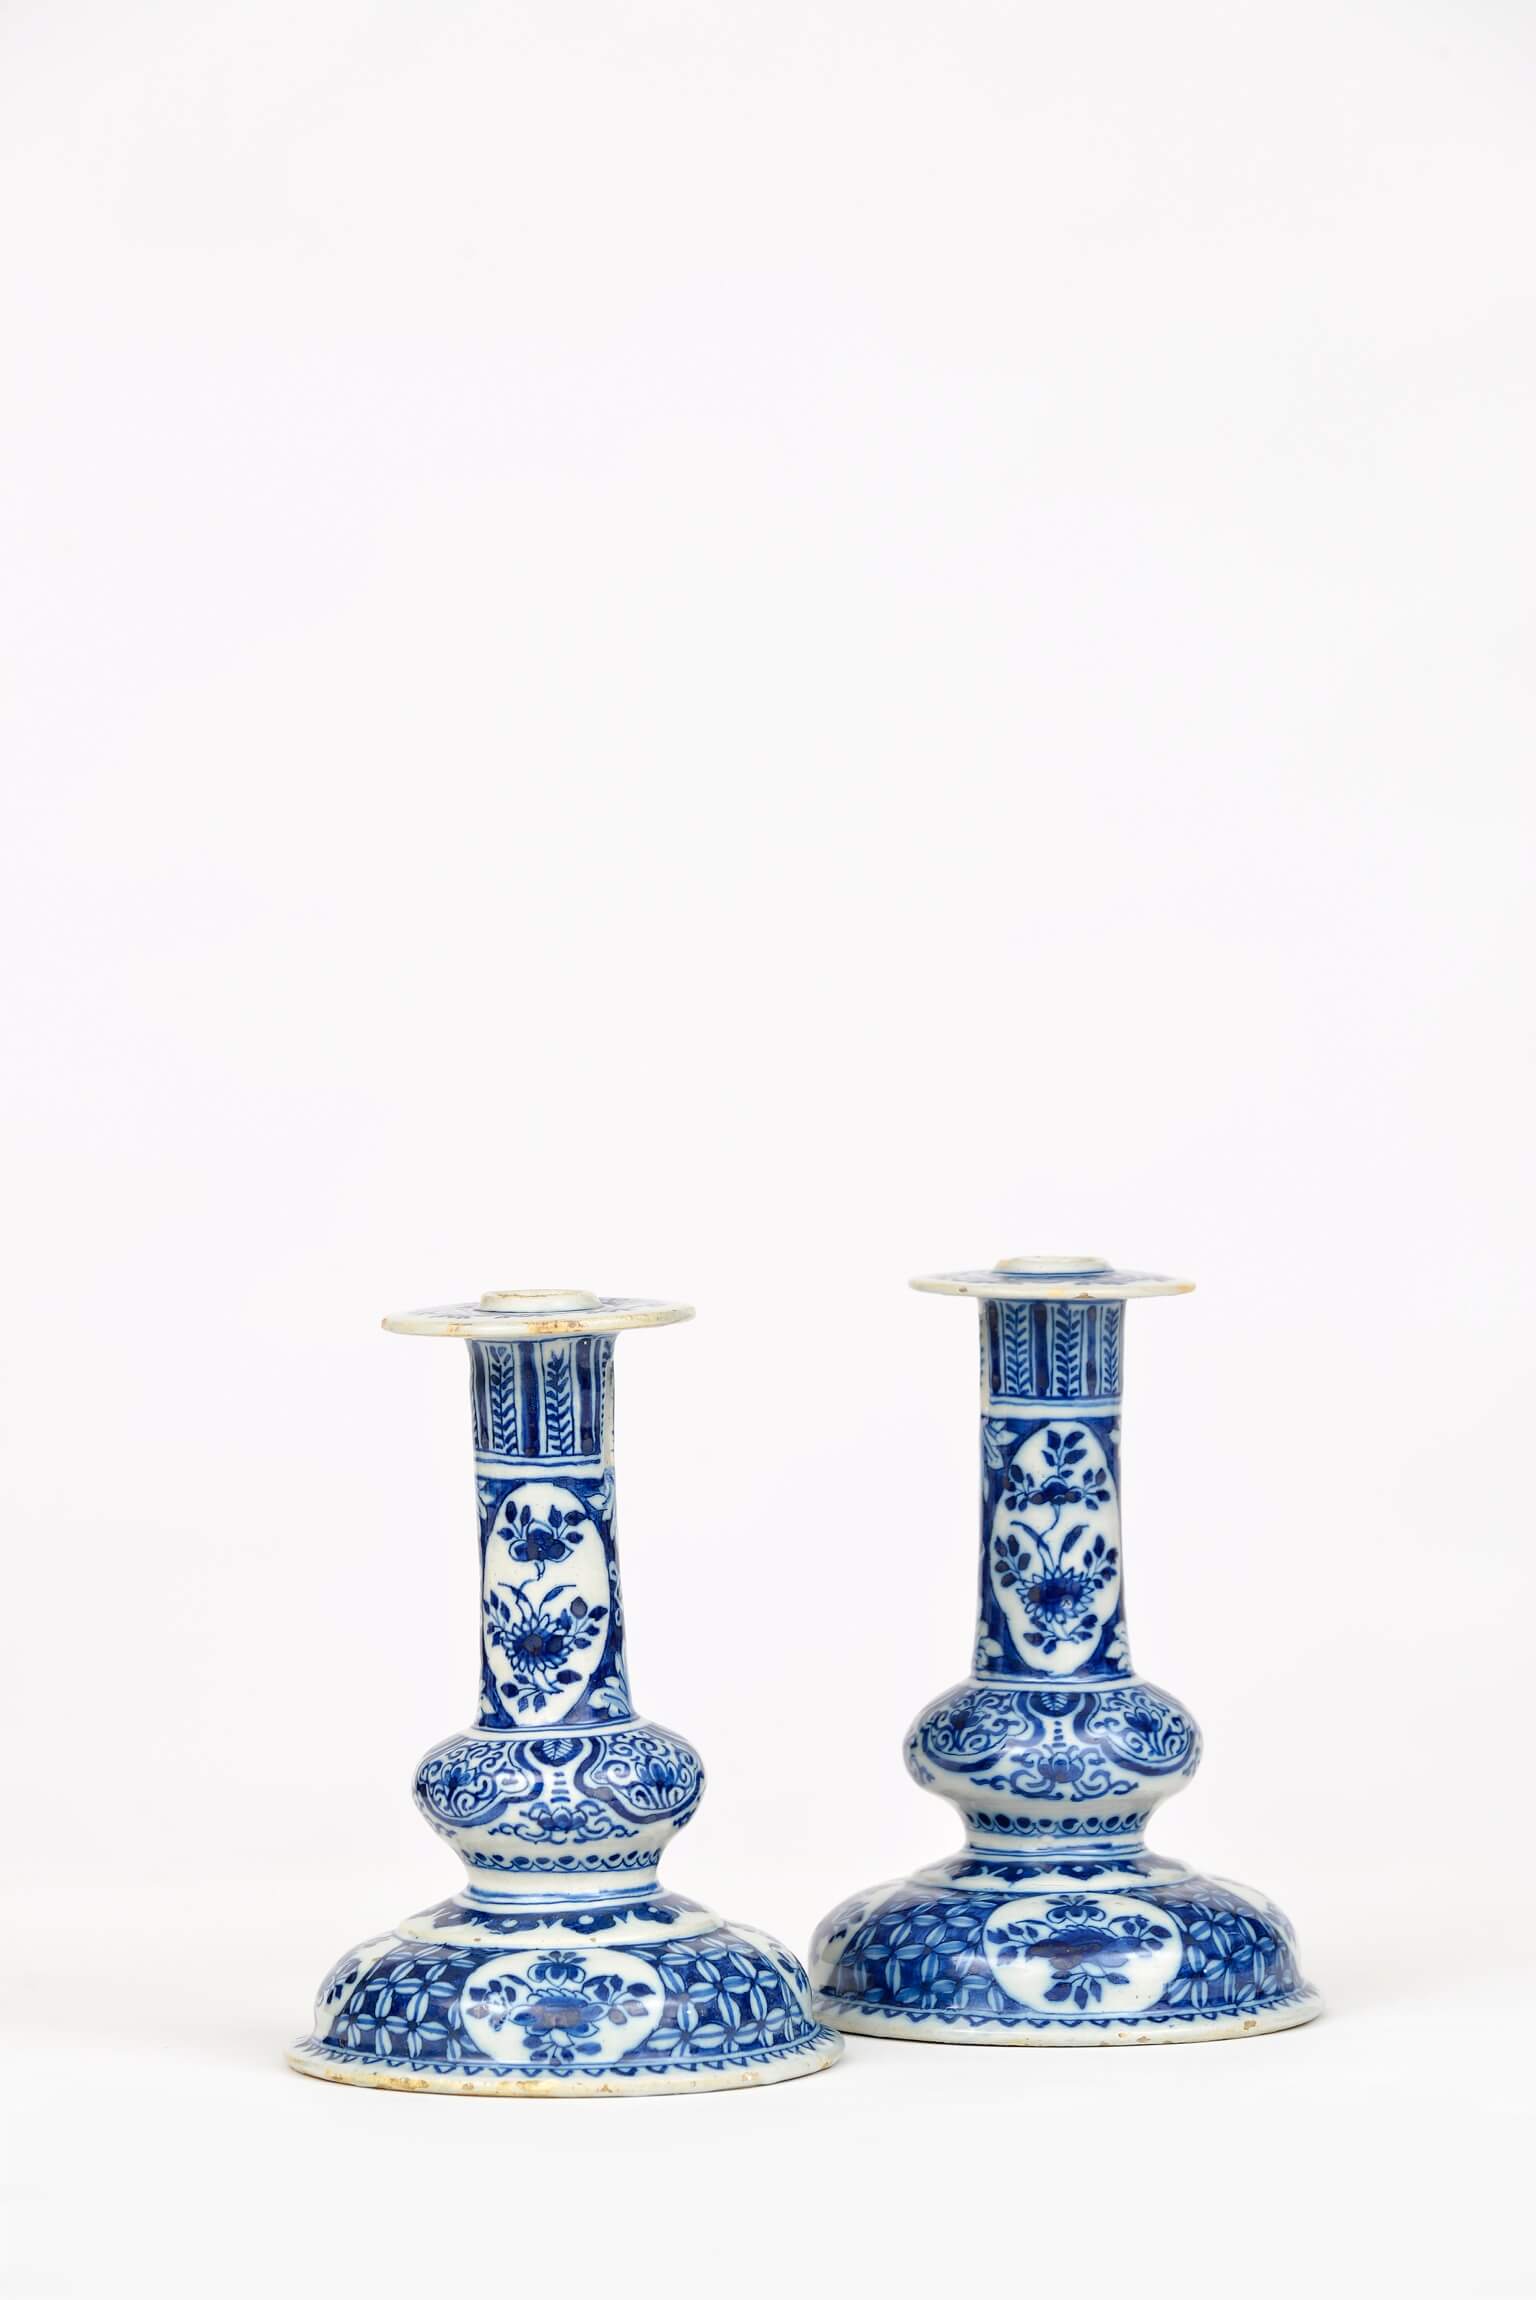 •D1422. Pair of Blue and White Silver-Shape Candlesticks